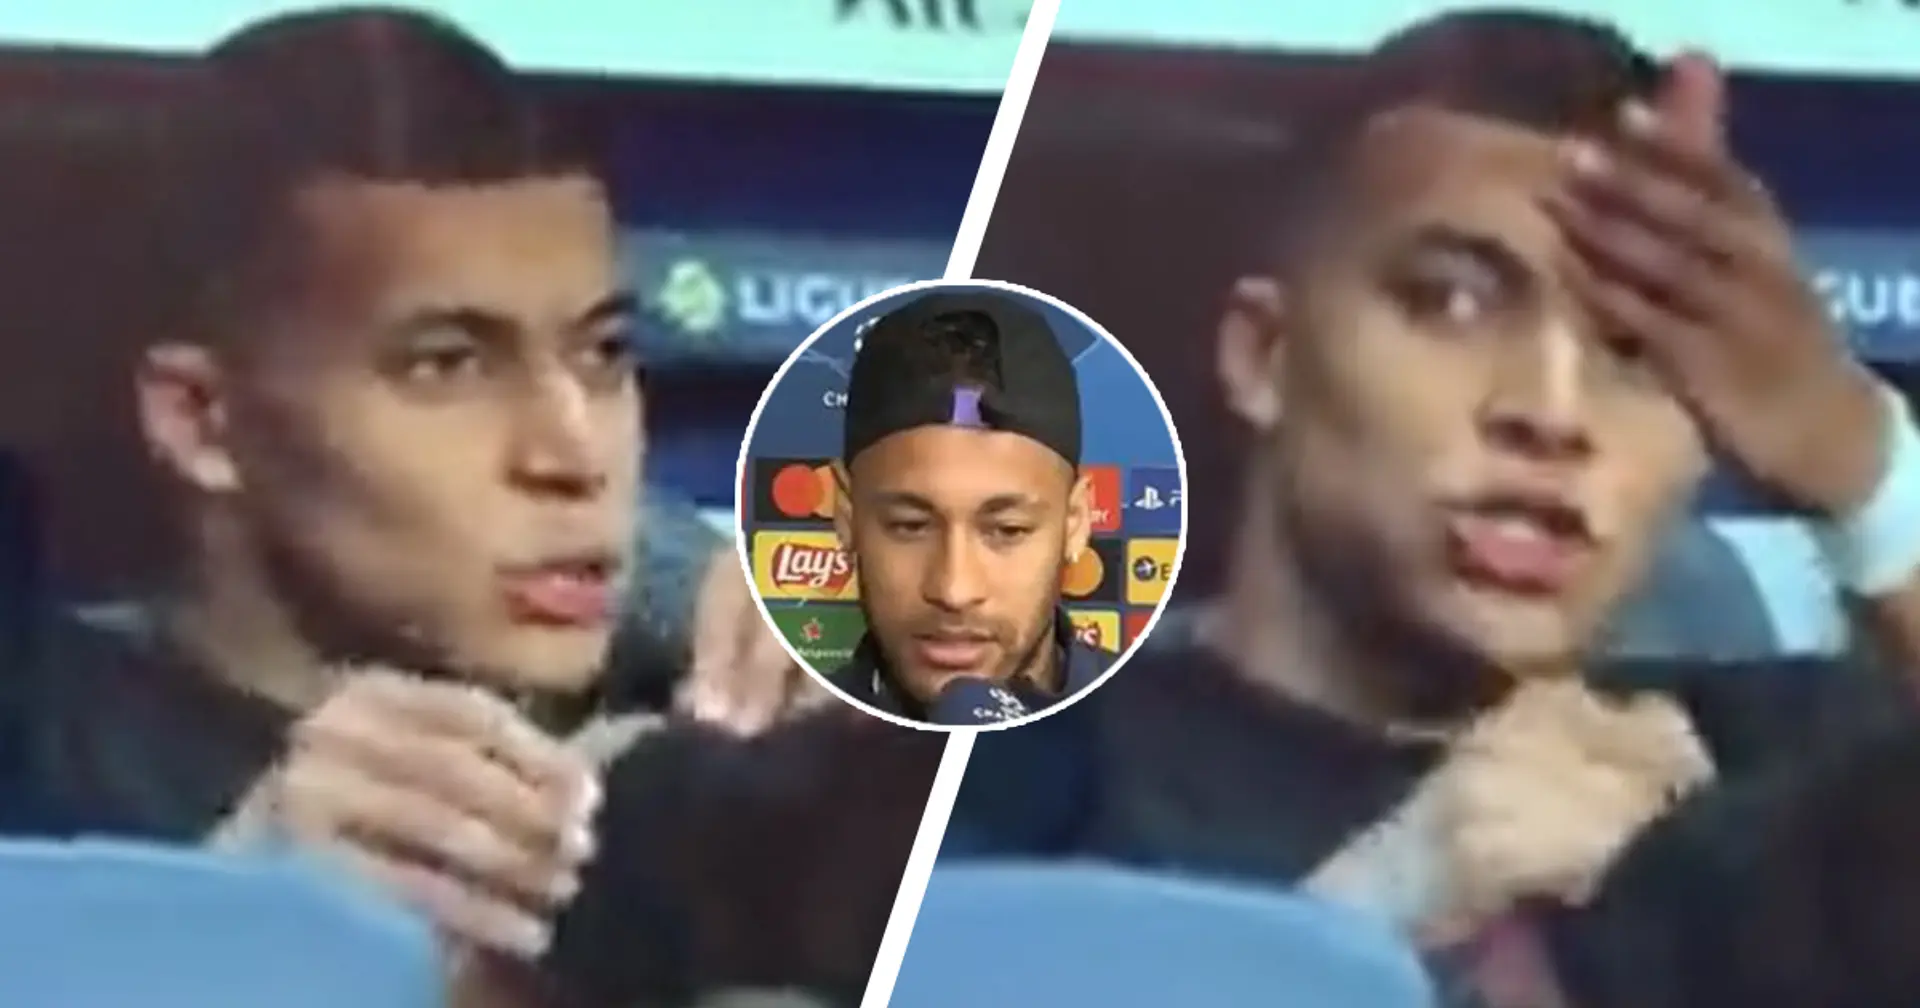 Mbappe spotted lashing out at Neymar from bench, his exact words revealed